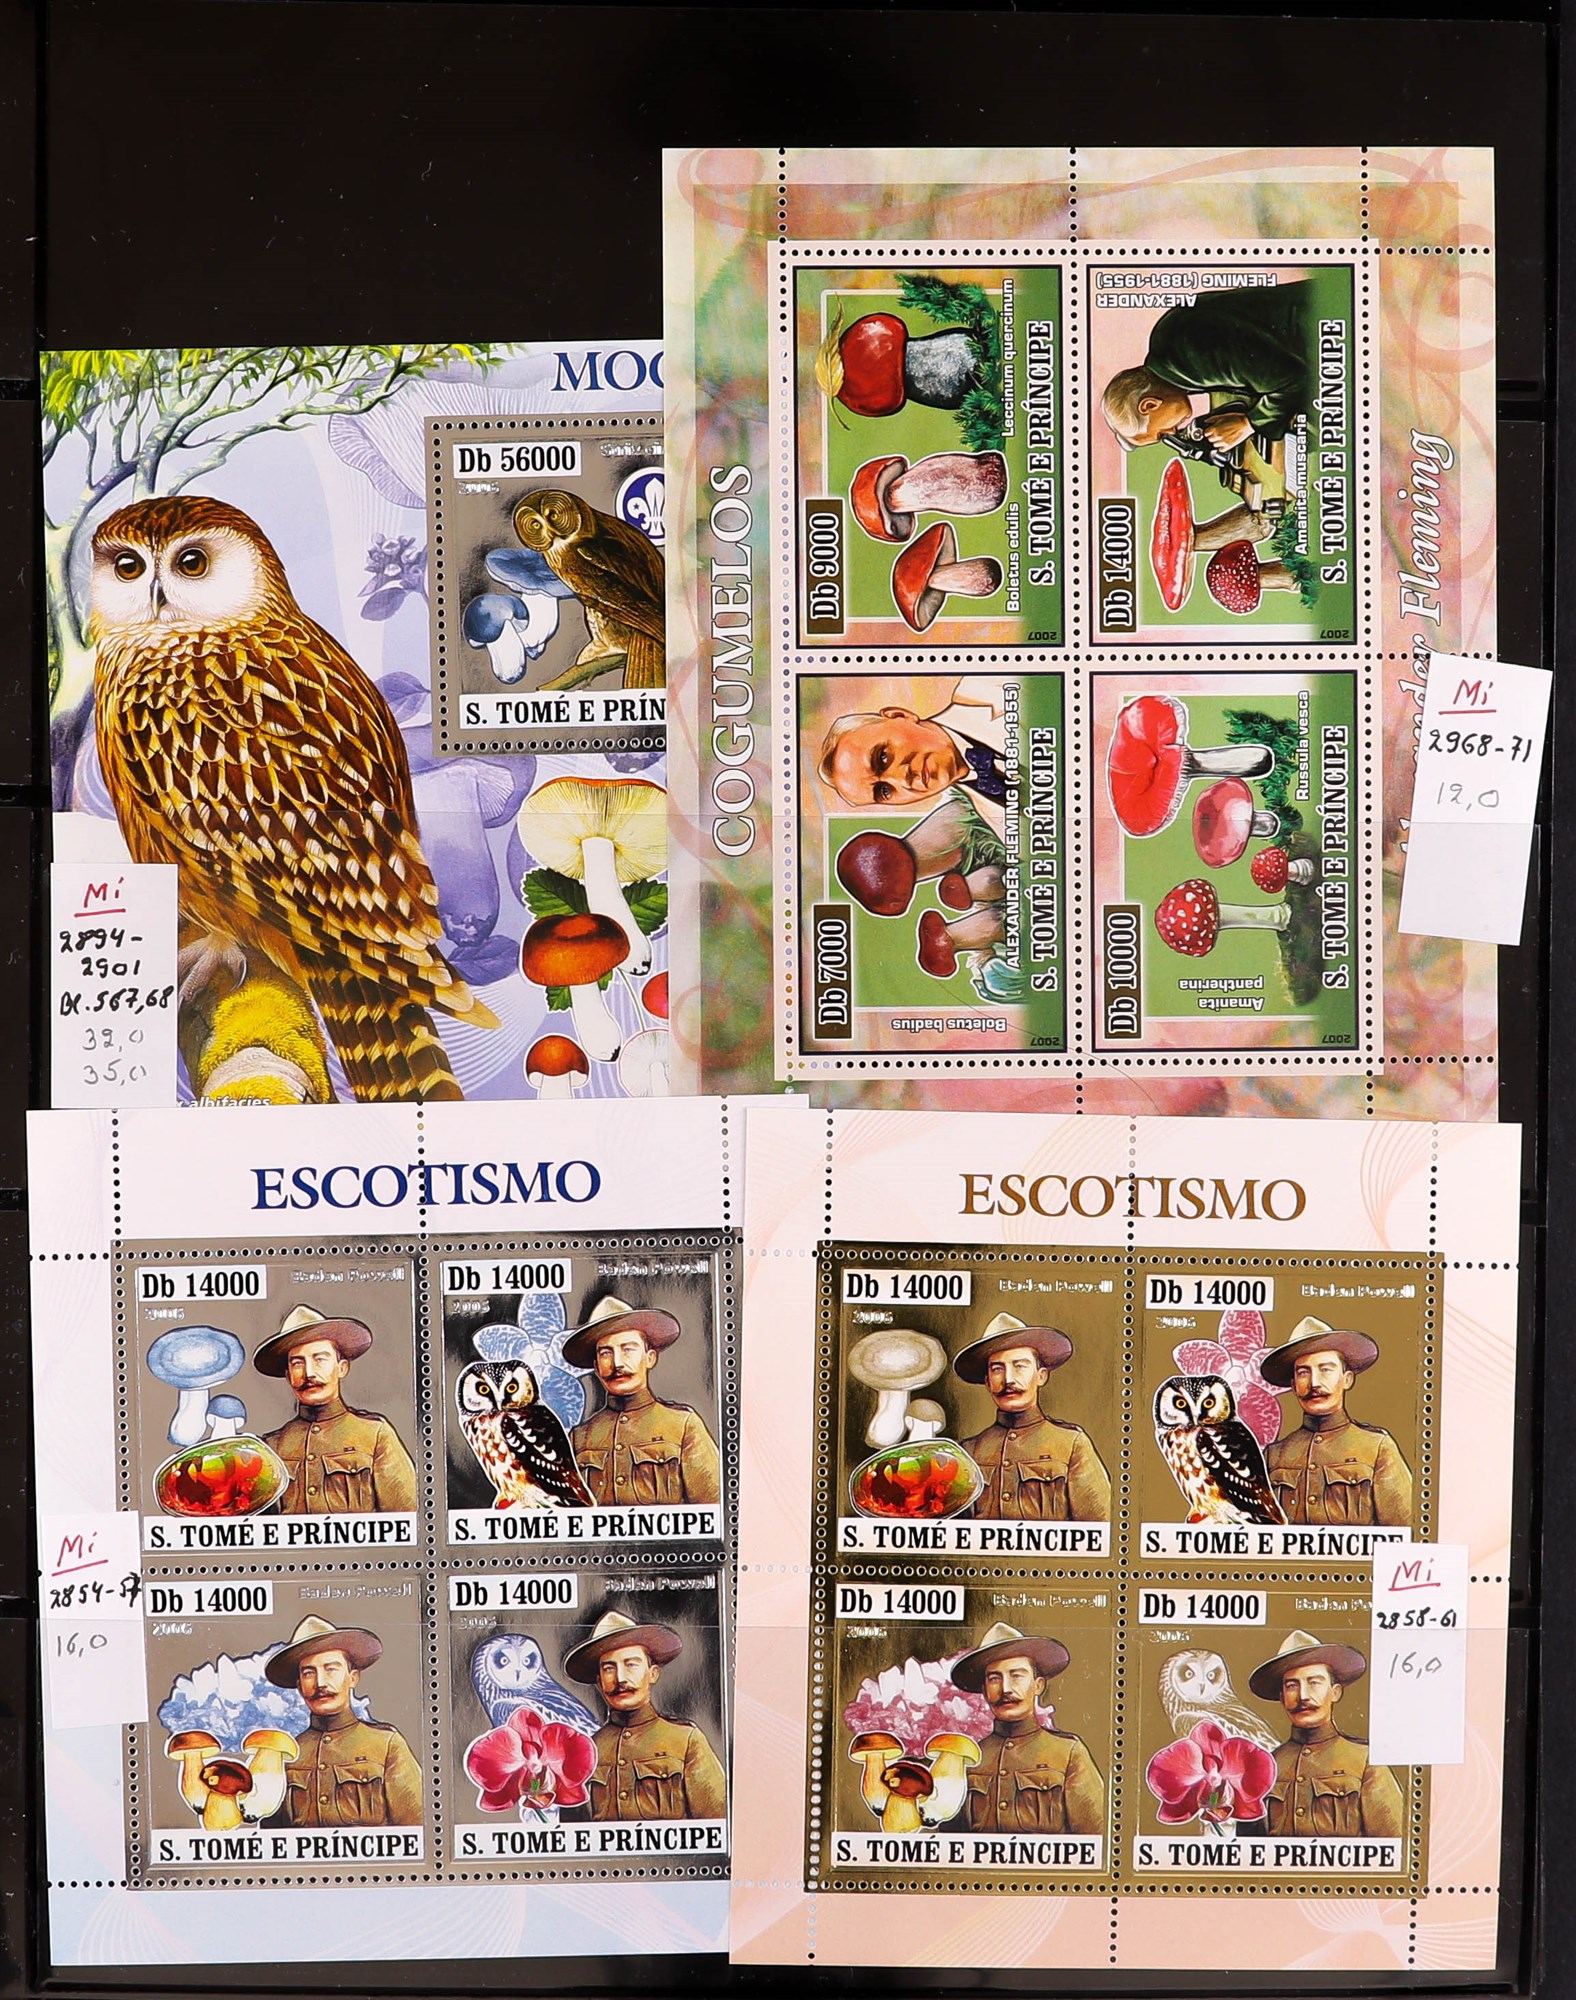 PORTUGUESE COLONIES FUNGI STAMPS OF ST THOMAS & PRINCE ISLANDS 1984 - 2014 never hinged mint - Image 11 of 30